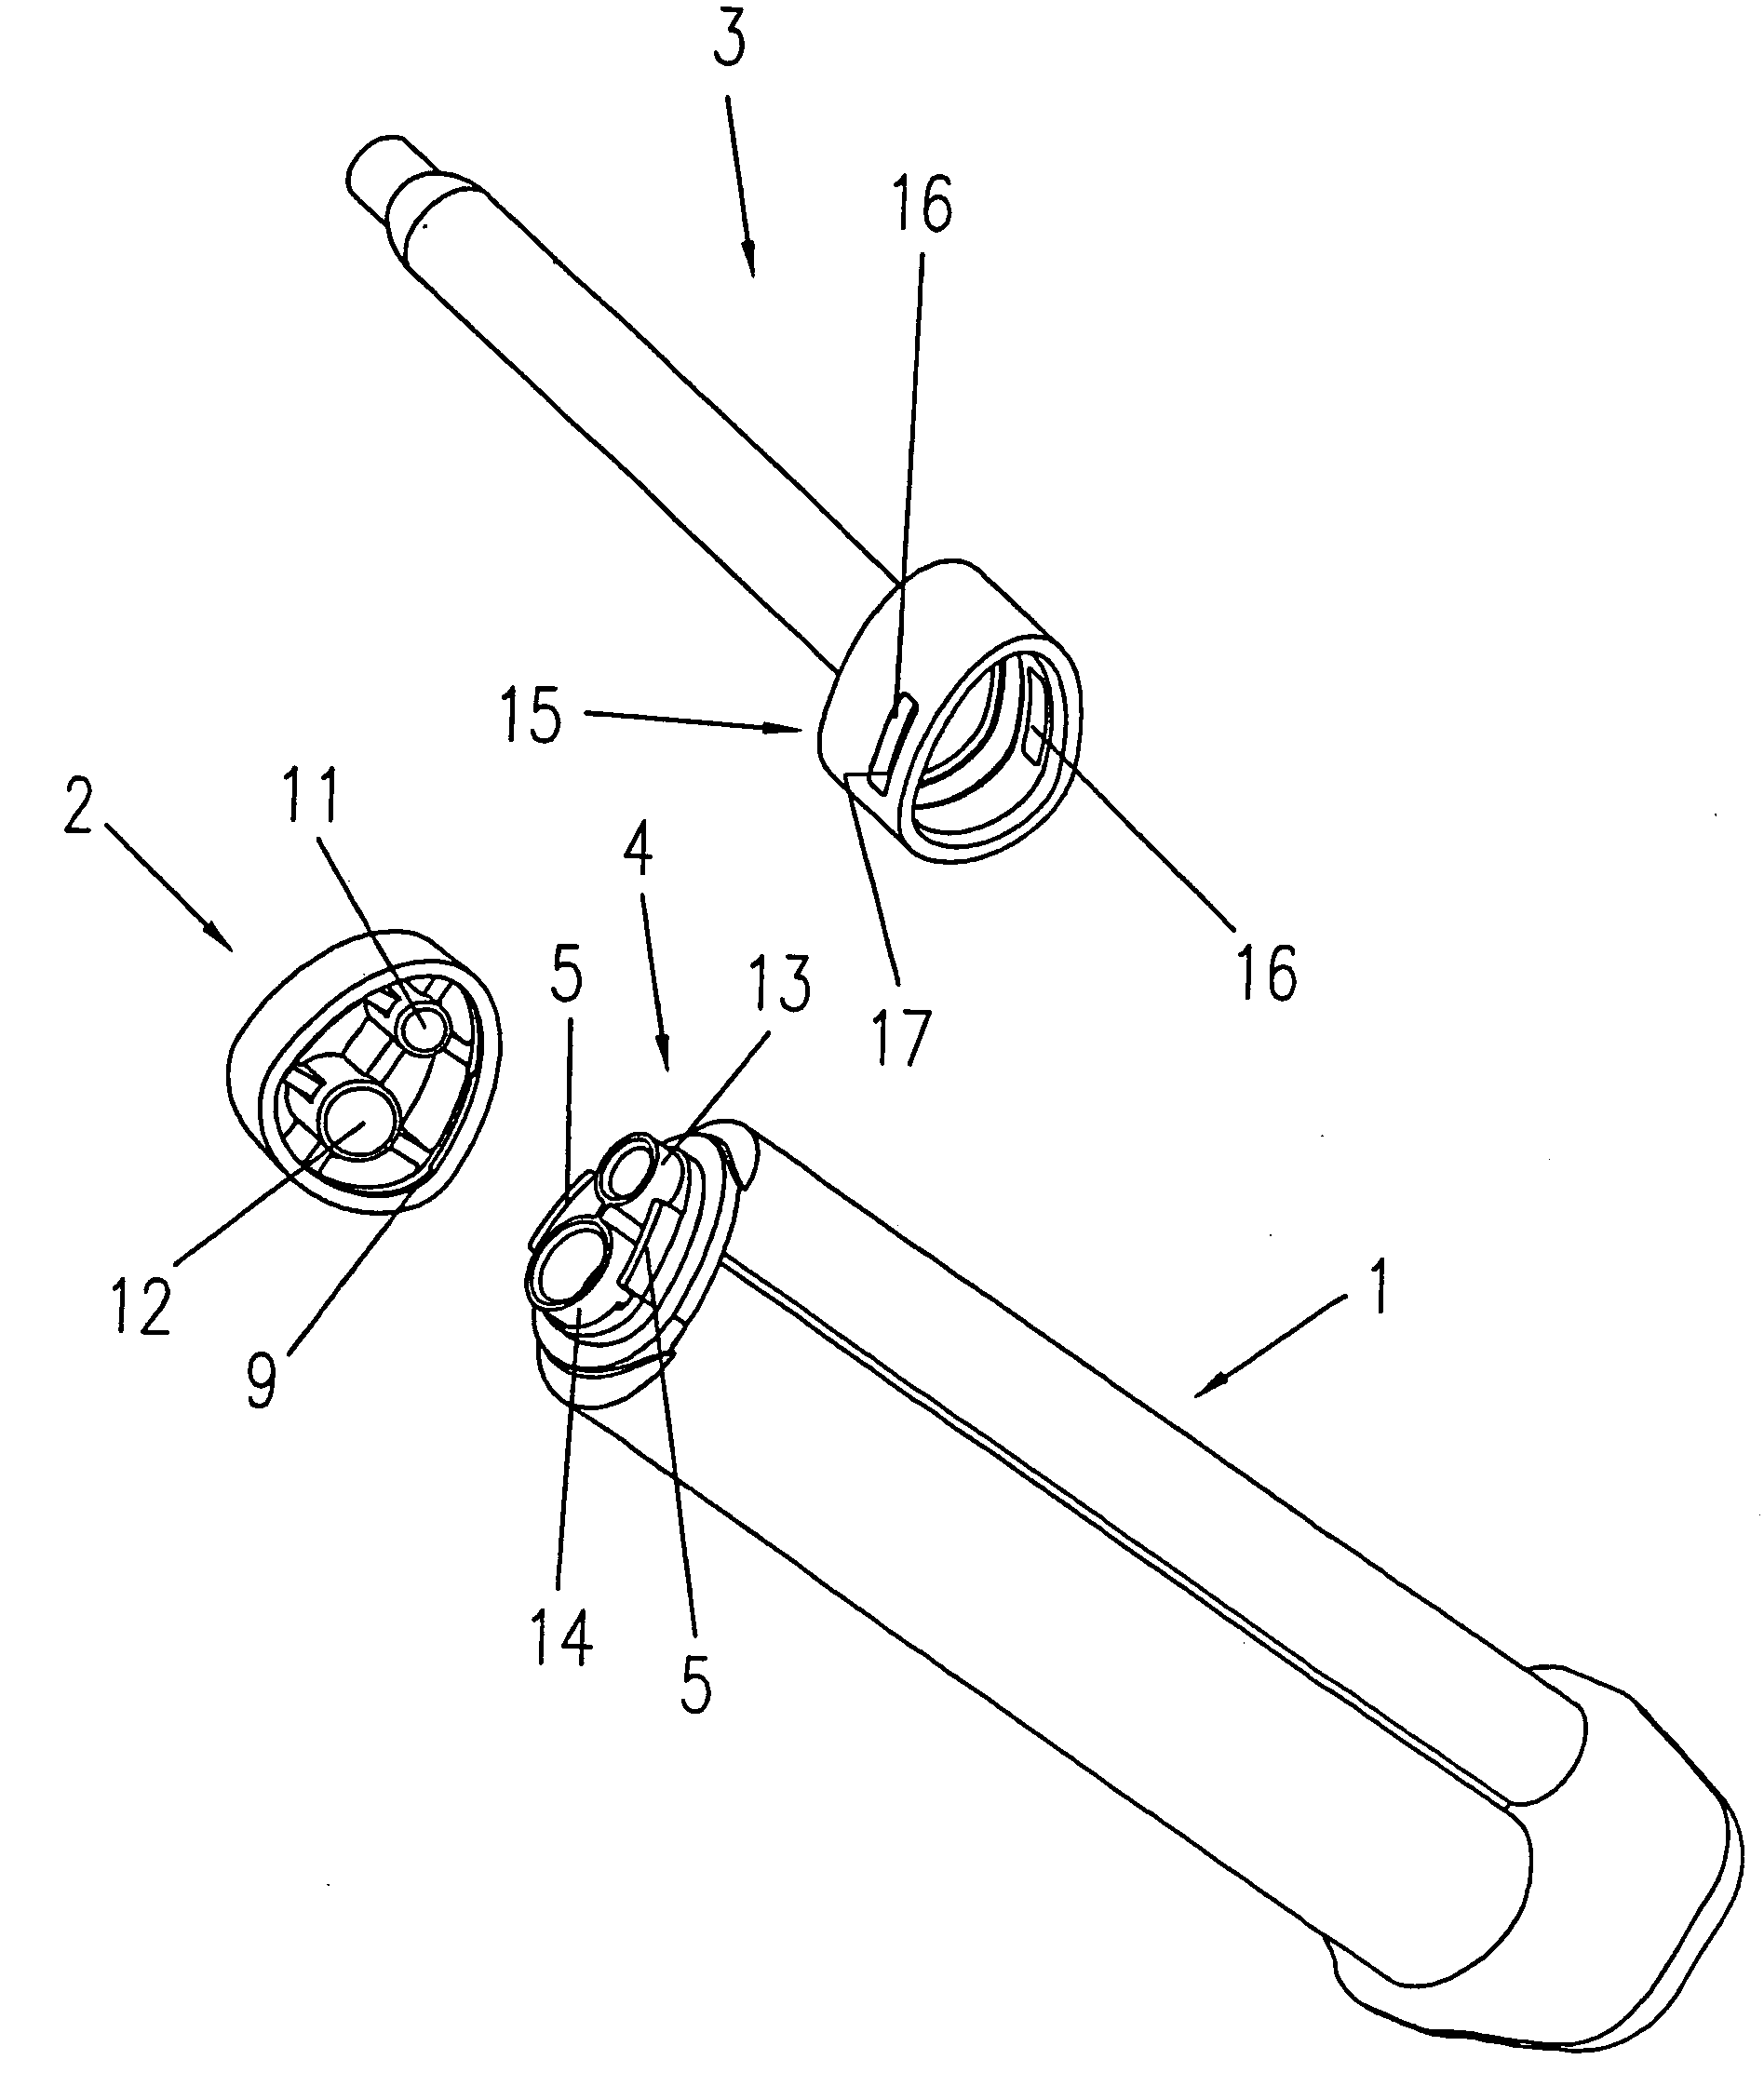 Dispensing Assembly Including a Syringe or Cartridge, a Closing Cap, and a Mixer